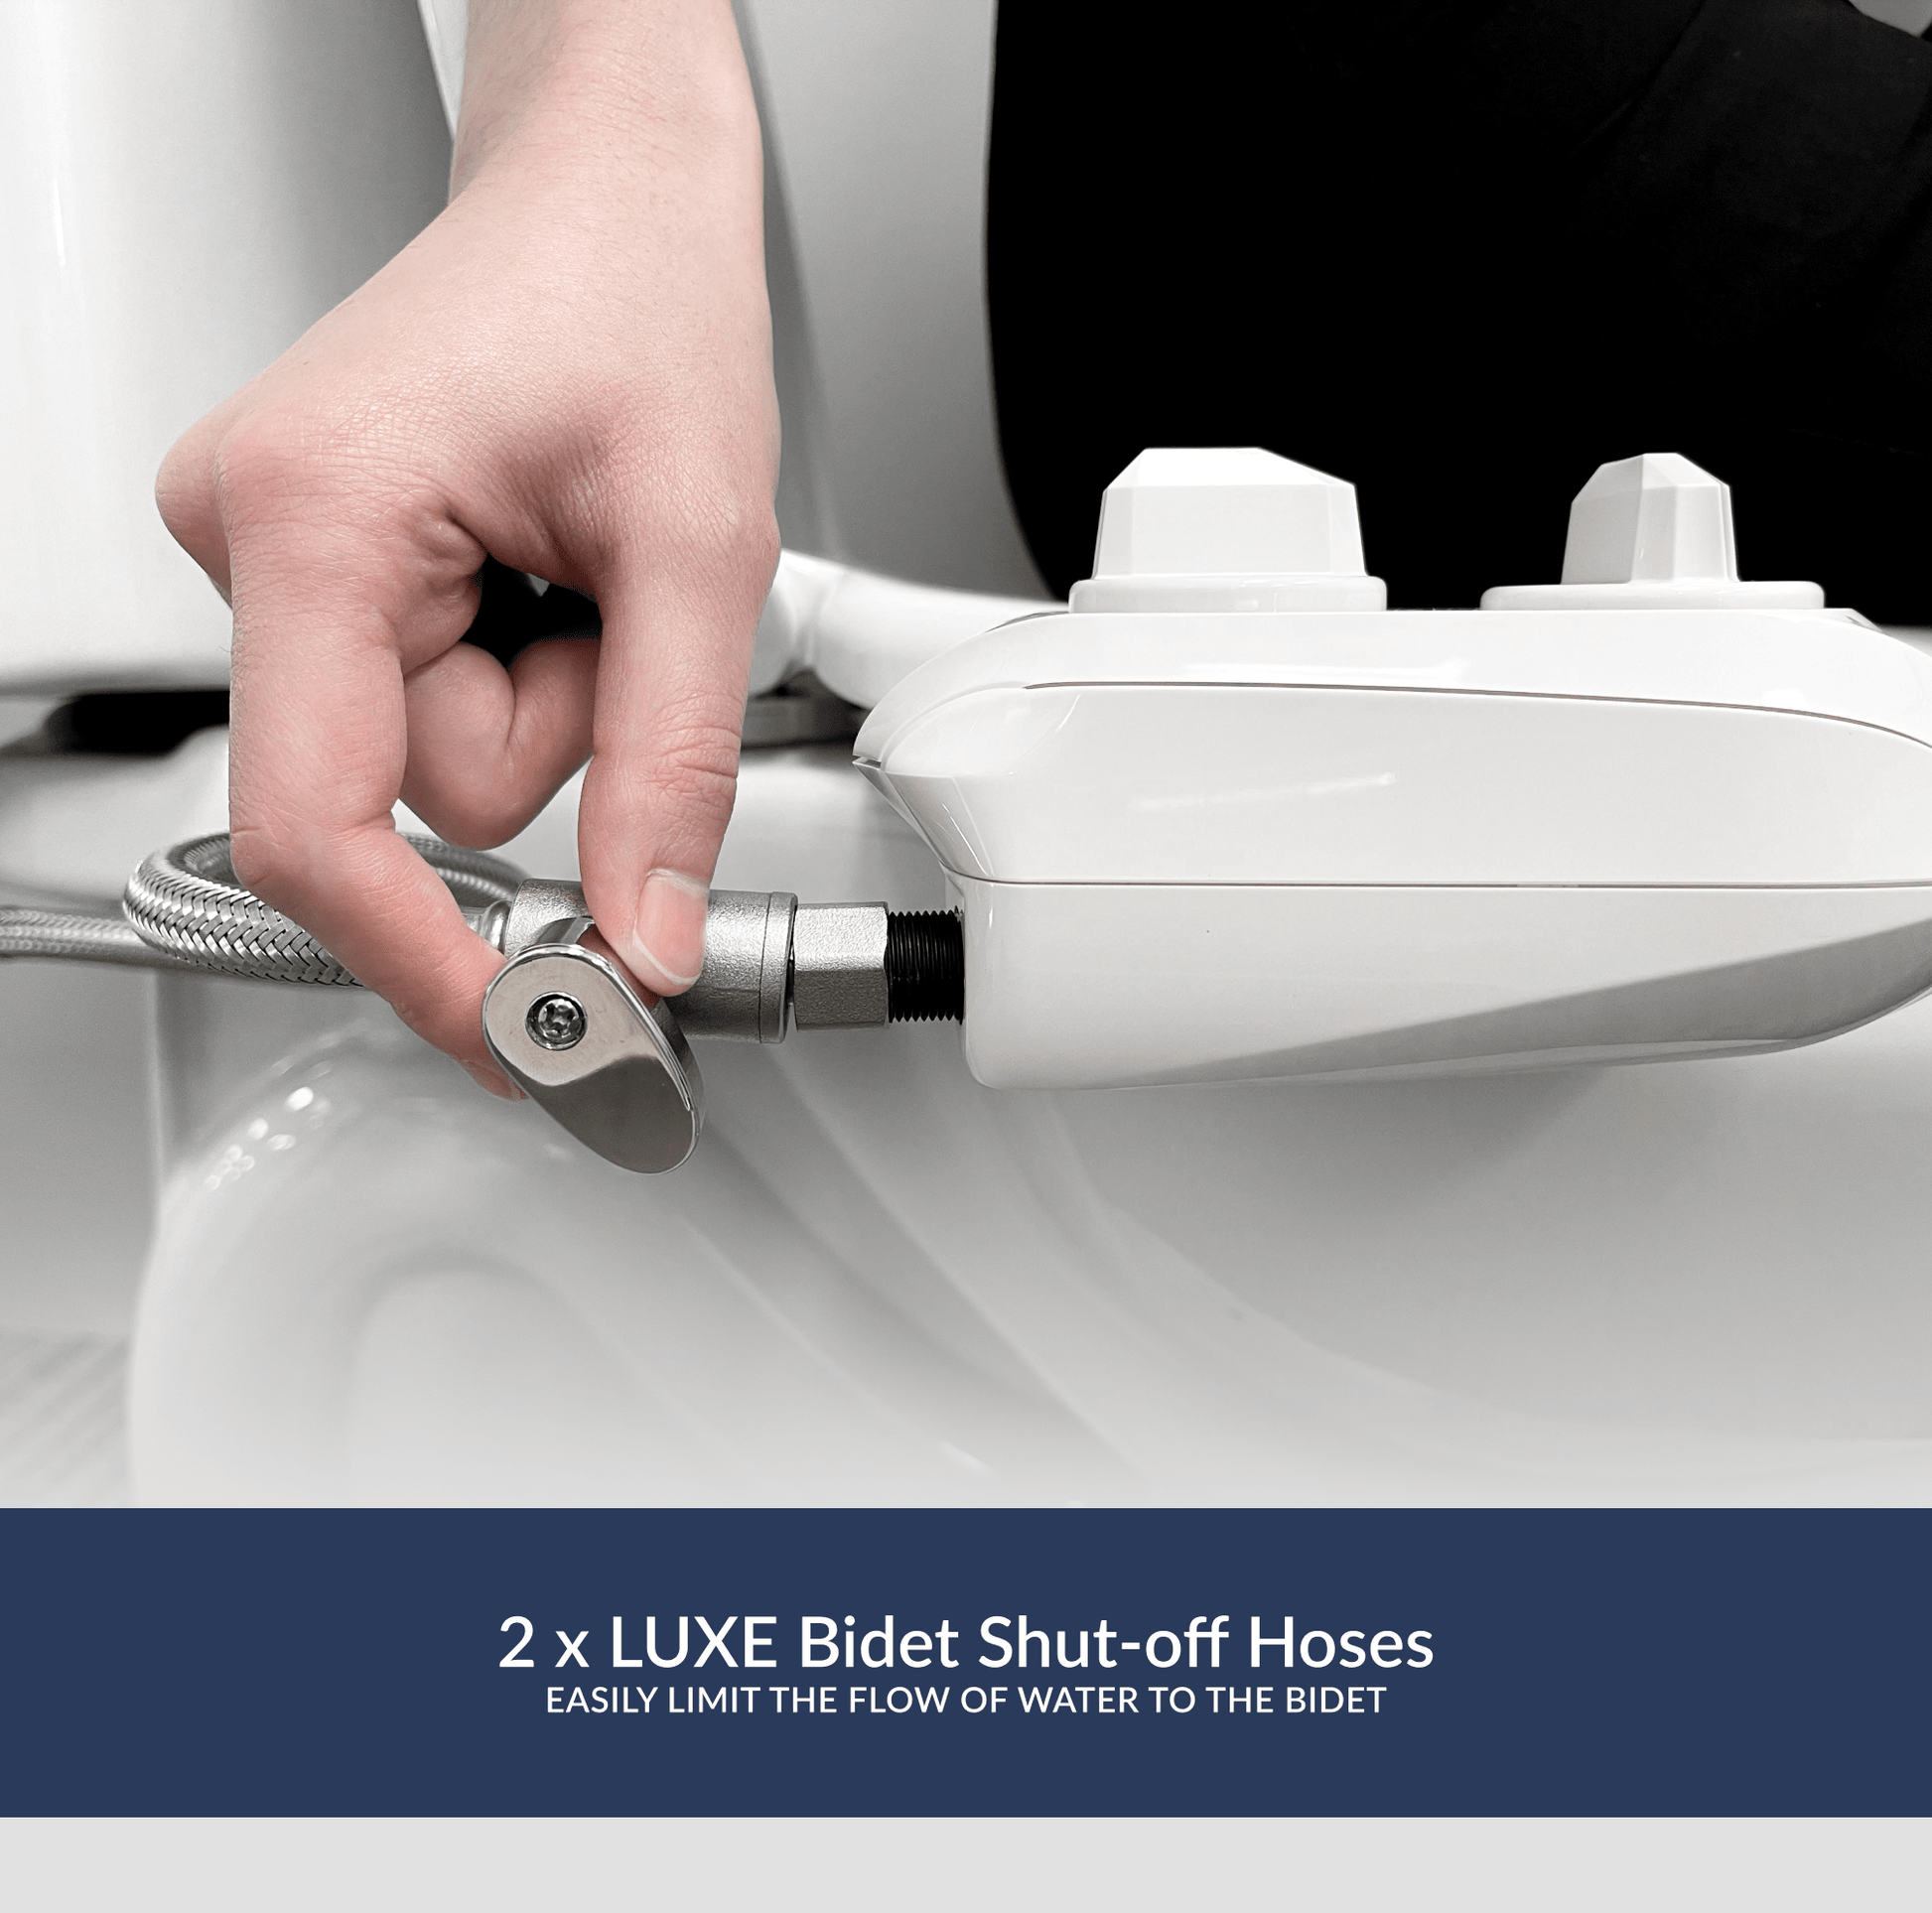 2 LUXE Bidet Shut-Off Hoses to easily limit flow of water to the bidet. Displaying hand turning shut-off valve to adjust flow